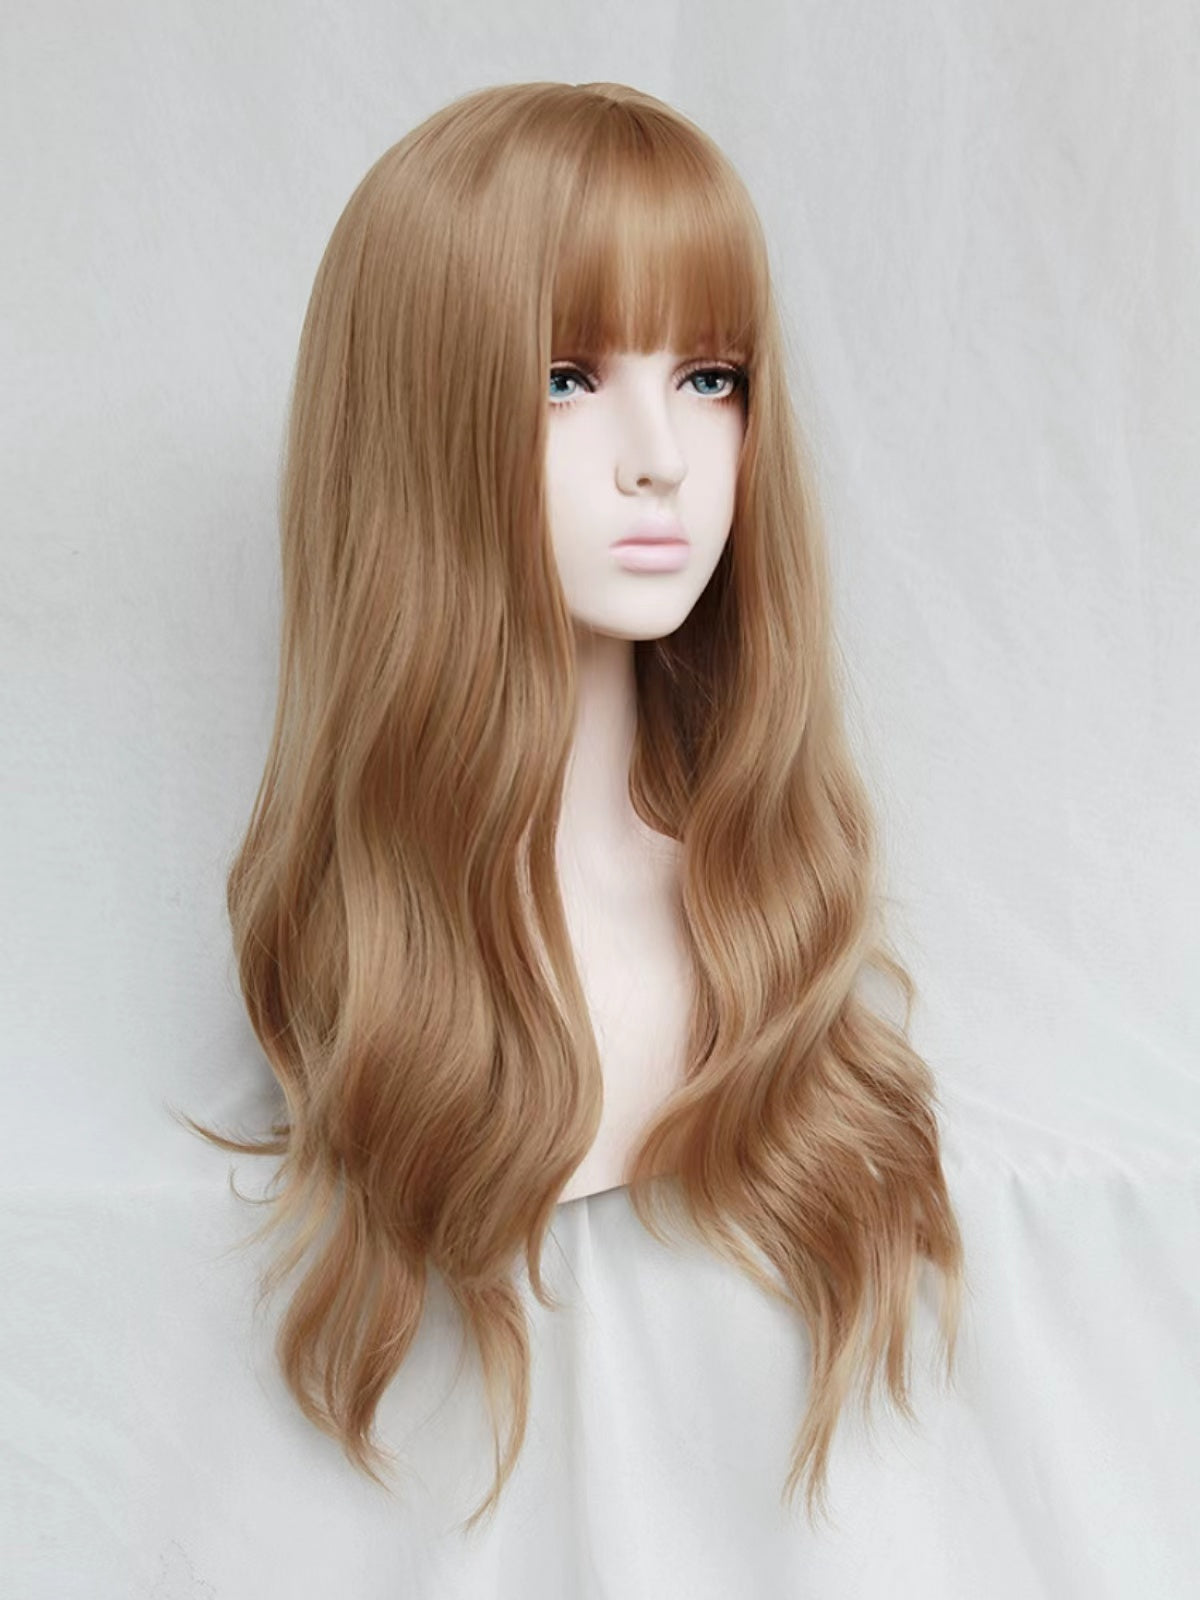 2022 New Style “Lisa” Inspired Blonde Long Wavy Synthetic Wig with Bangs